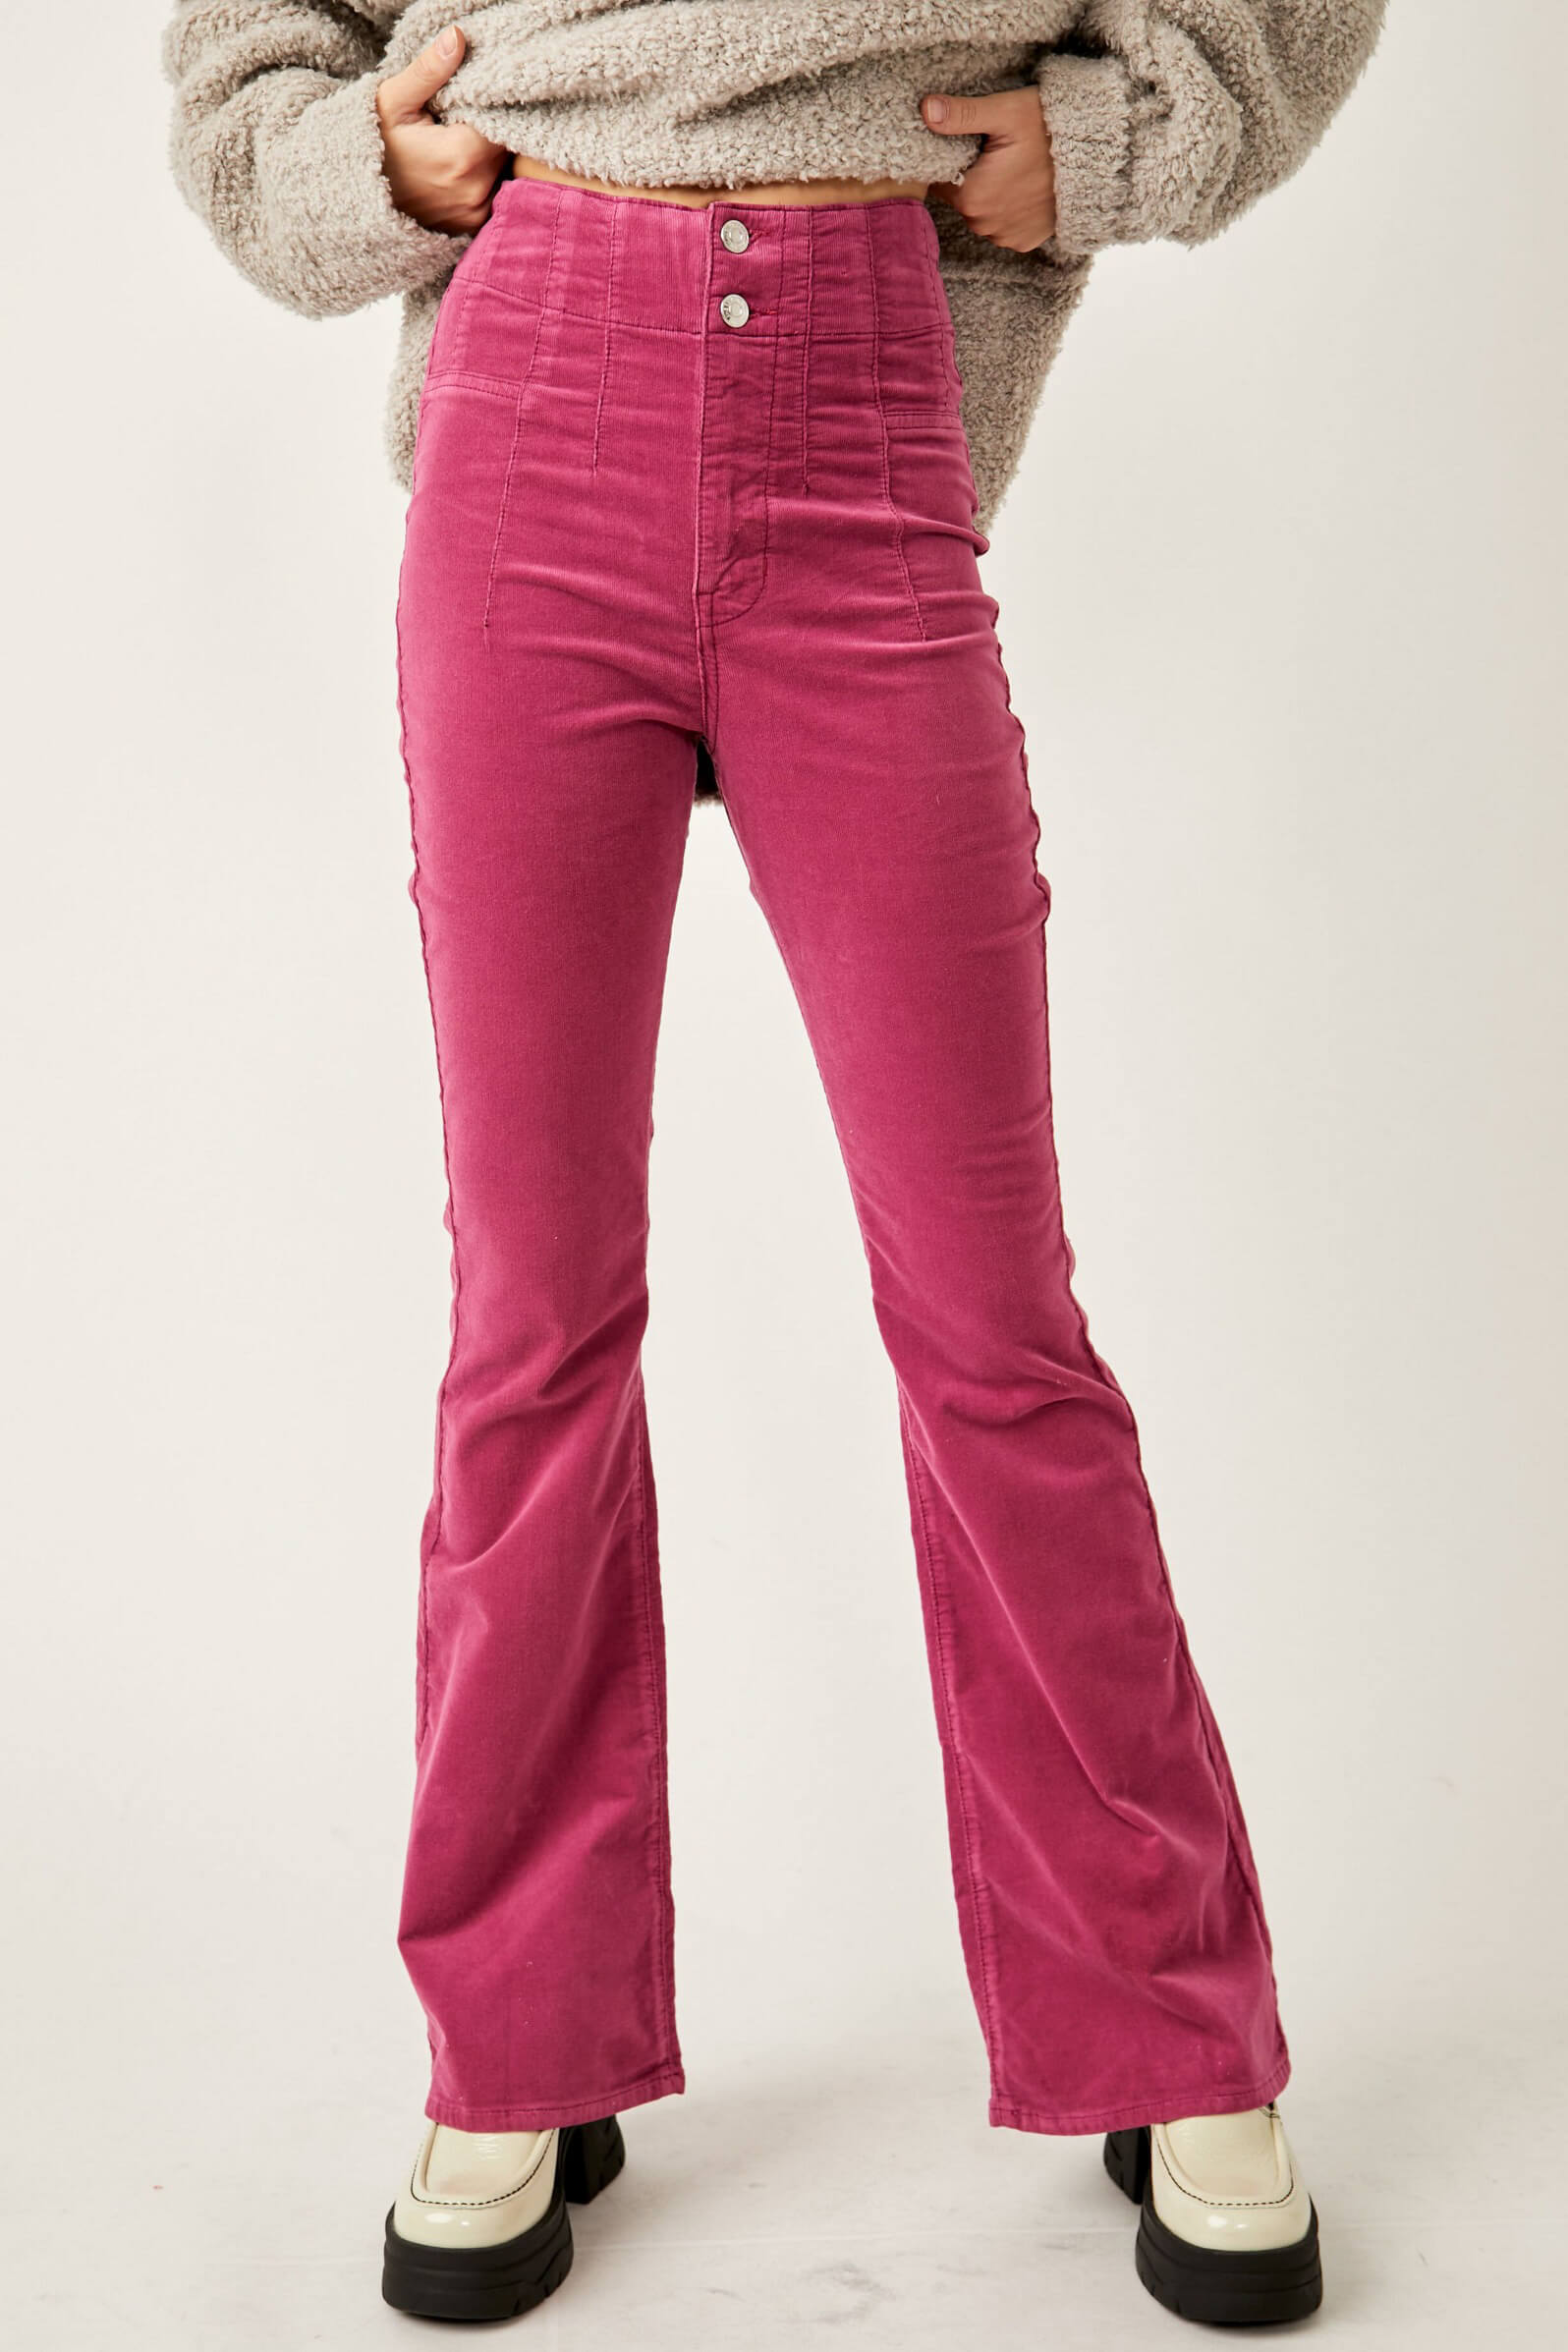 pink cord flares